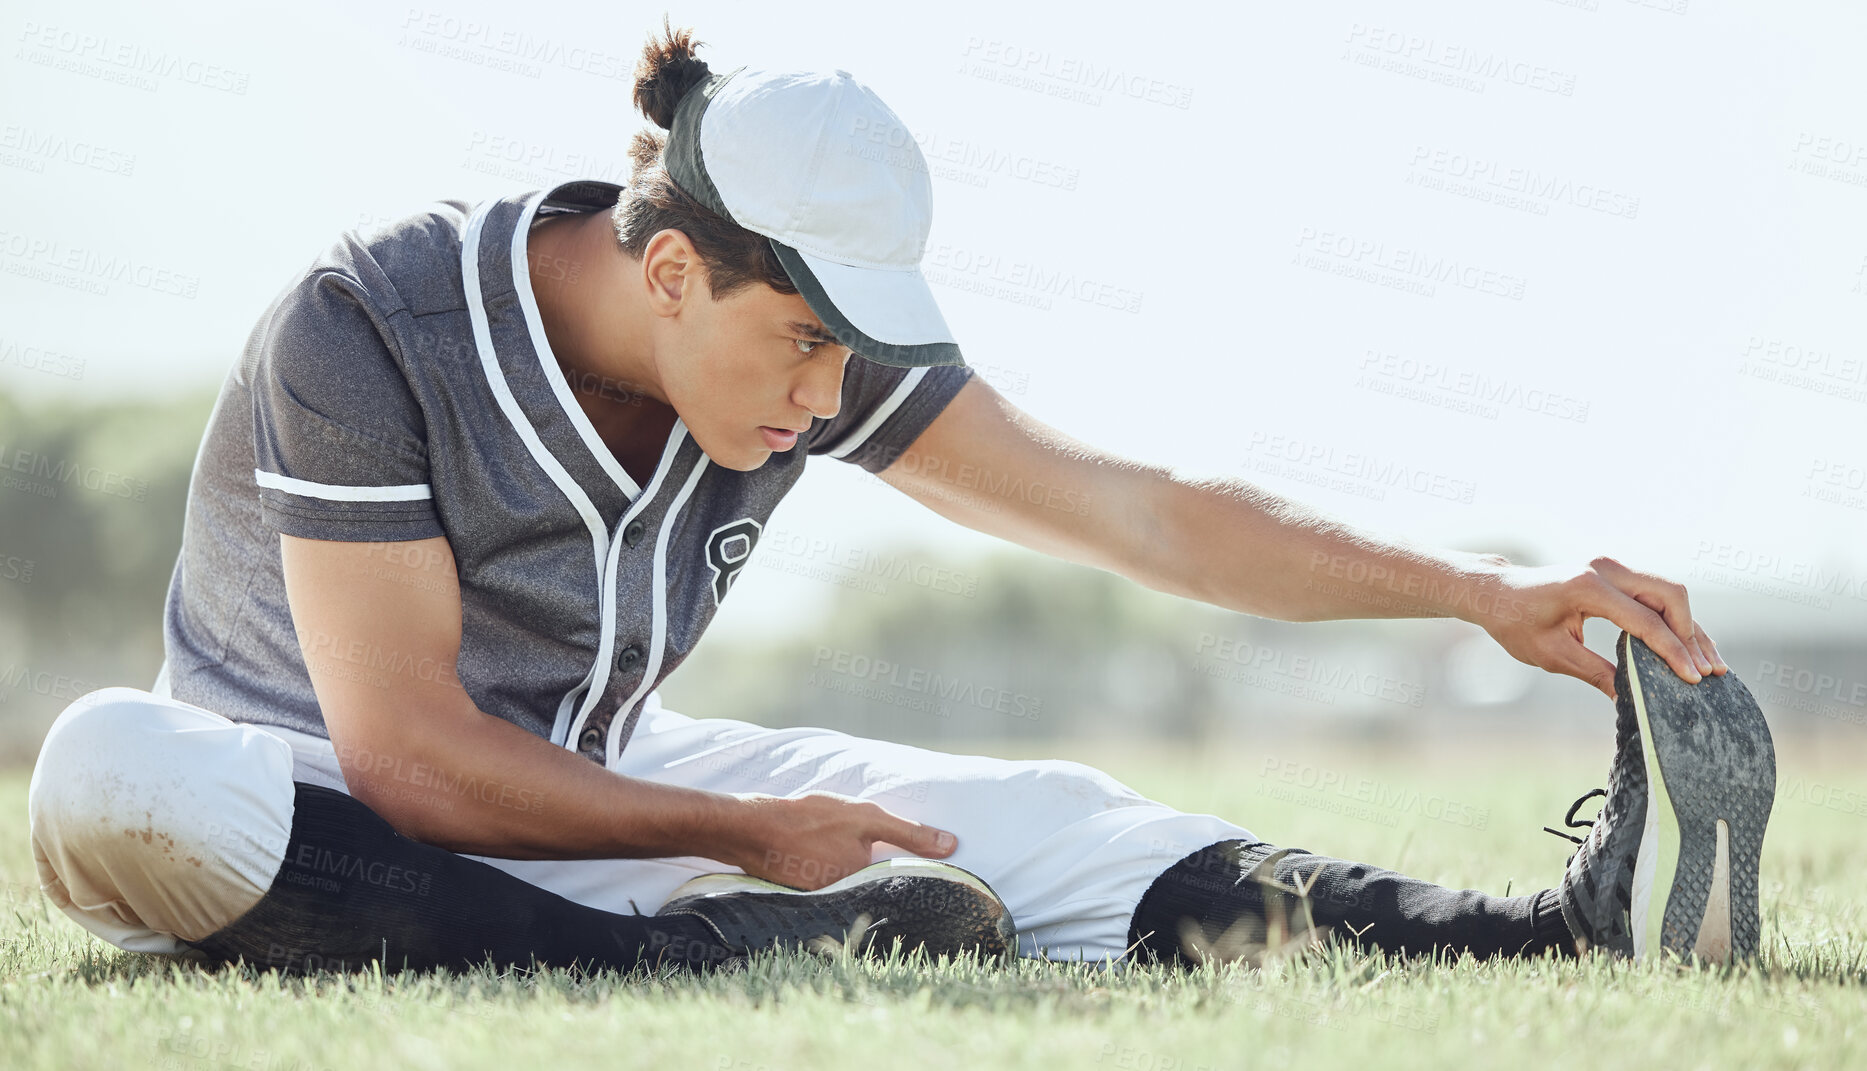 Buy stock photo Full length of a baseball player sitting on a pitch and stretching before playing a game. Serious and focused athlete getting ready to play match on grass. Fit, active, sporty, athletic man